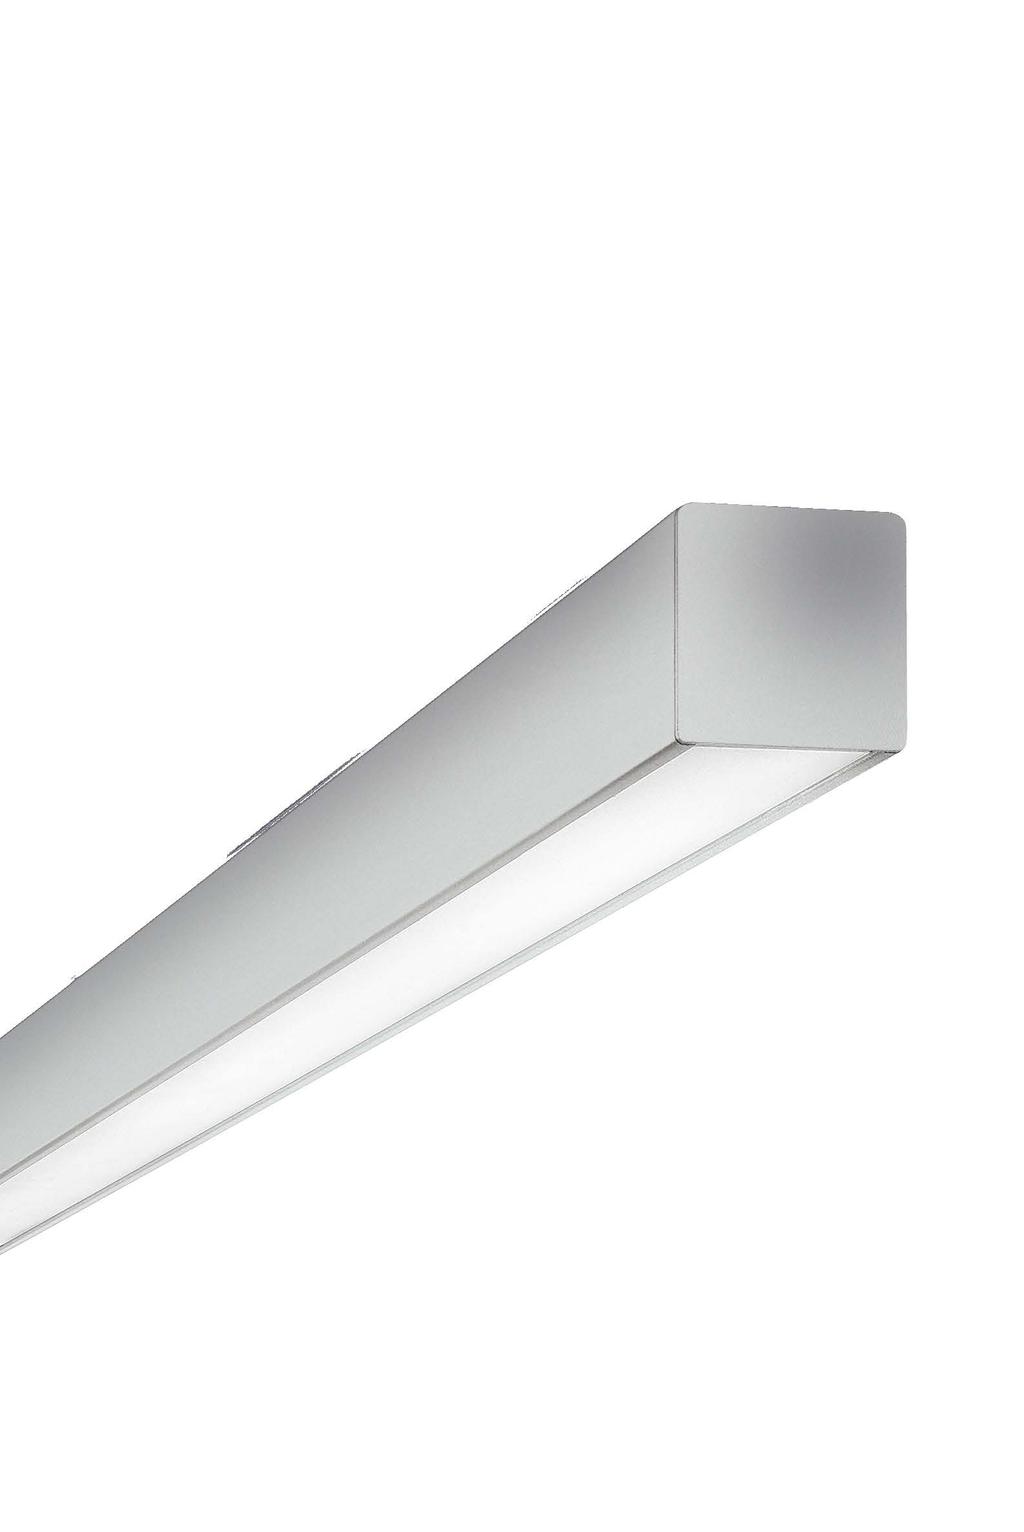 OVVIO LED TYPE: PROJECT NAME: DESCRIPTION OVVIO LED is the perfect fusion of performance, versatility and clean minimal design, all in a single product.